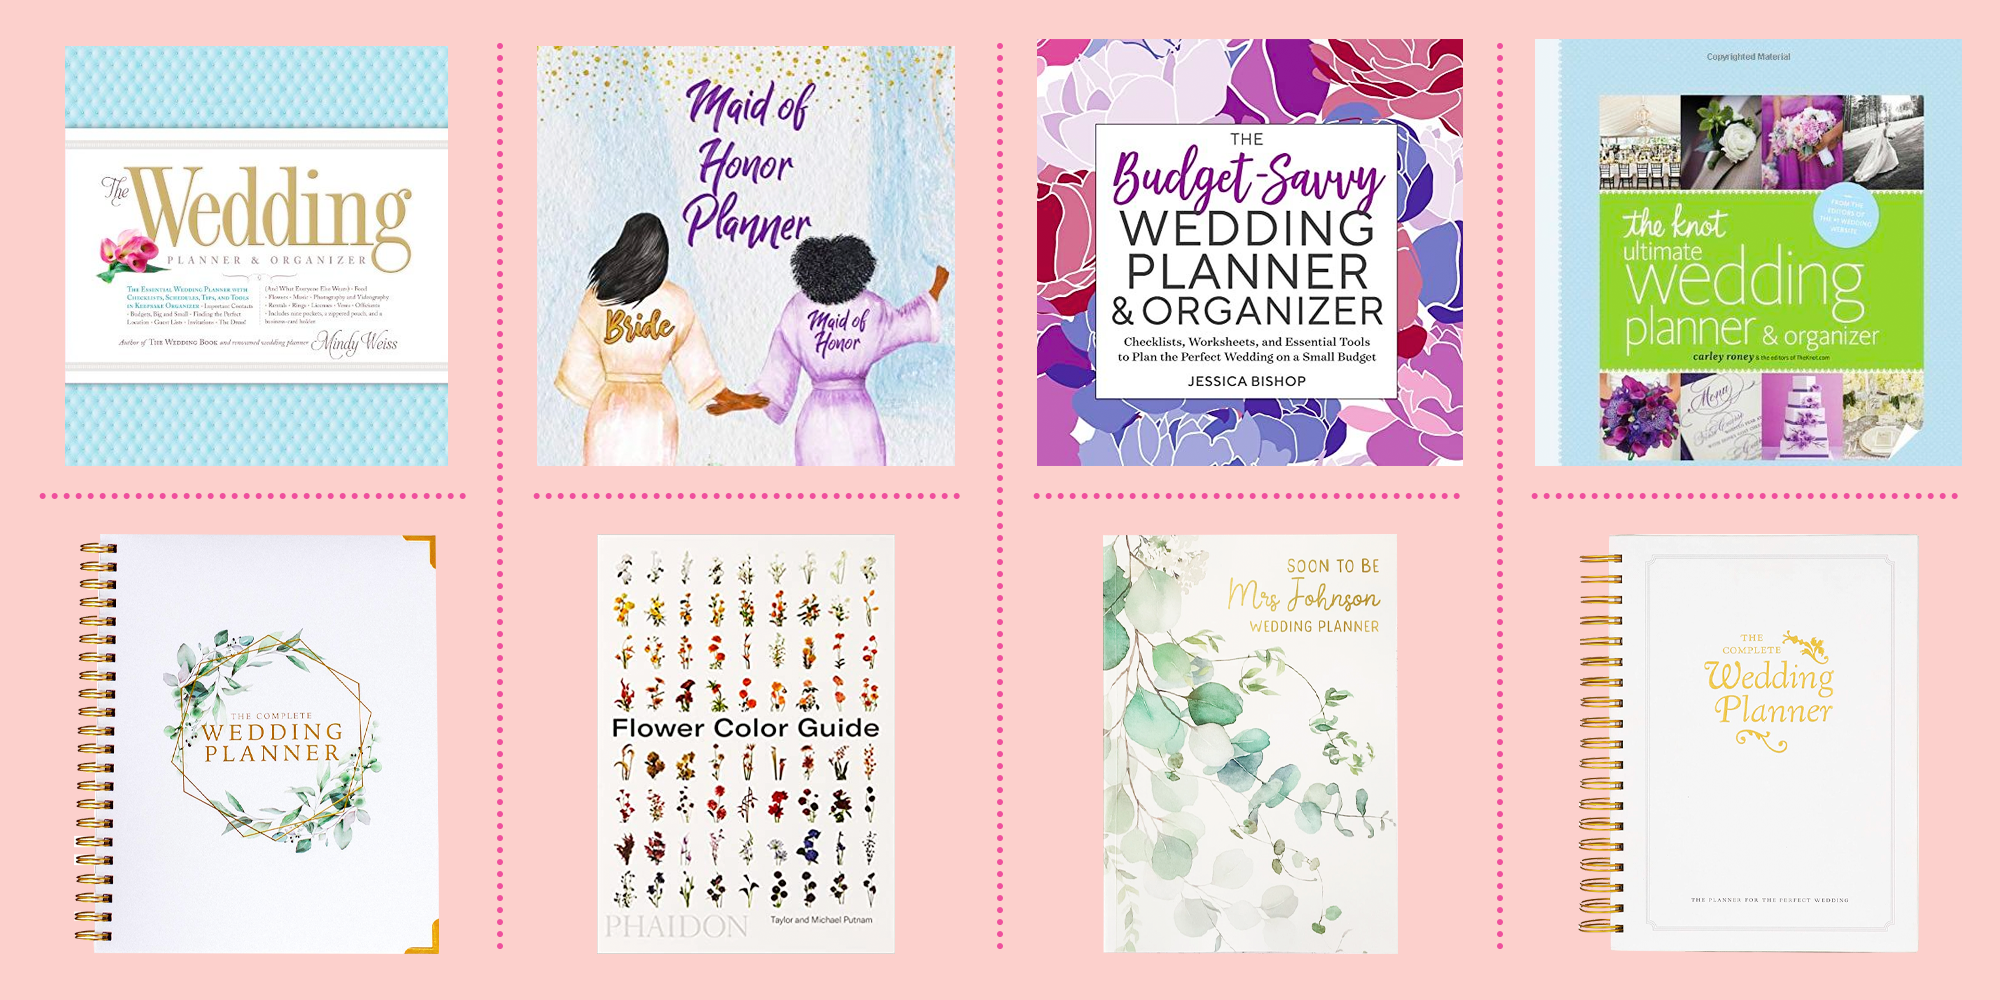 20 Best Wedding Planning Books and Organizers of 2023